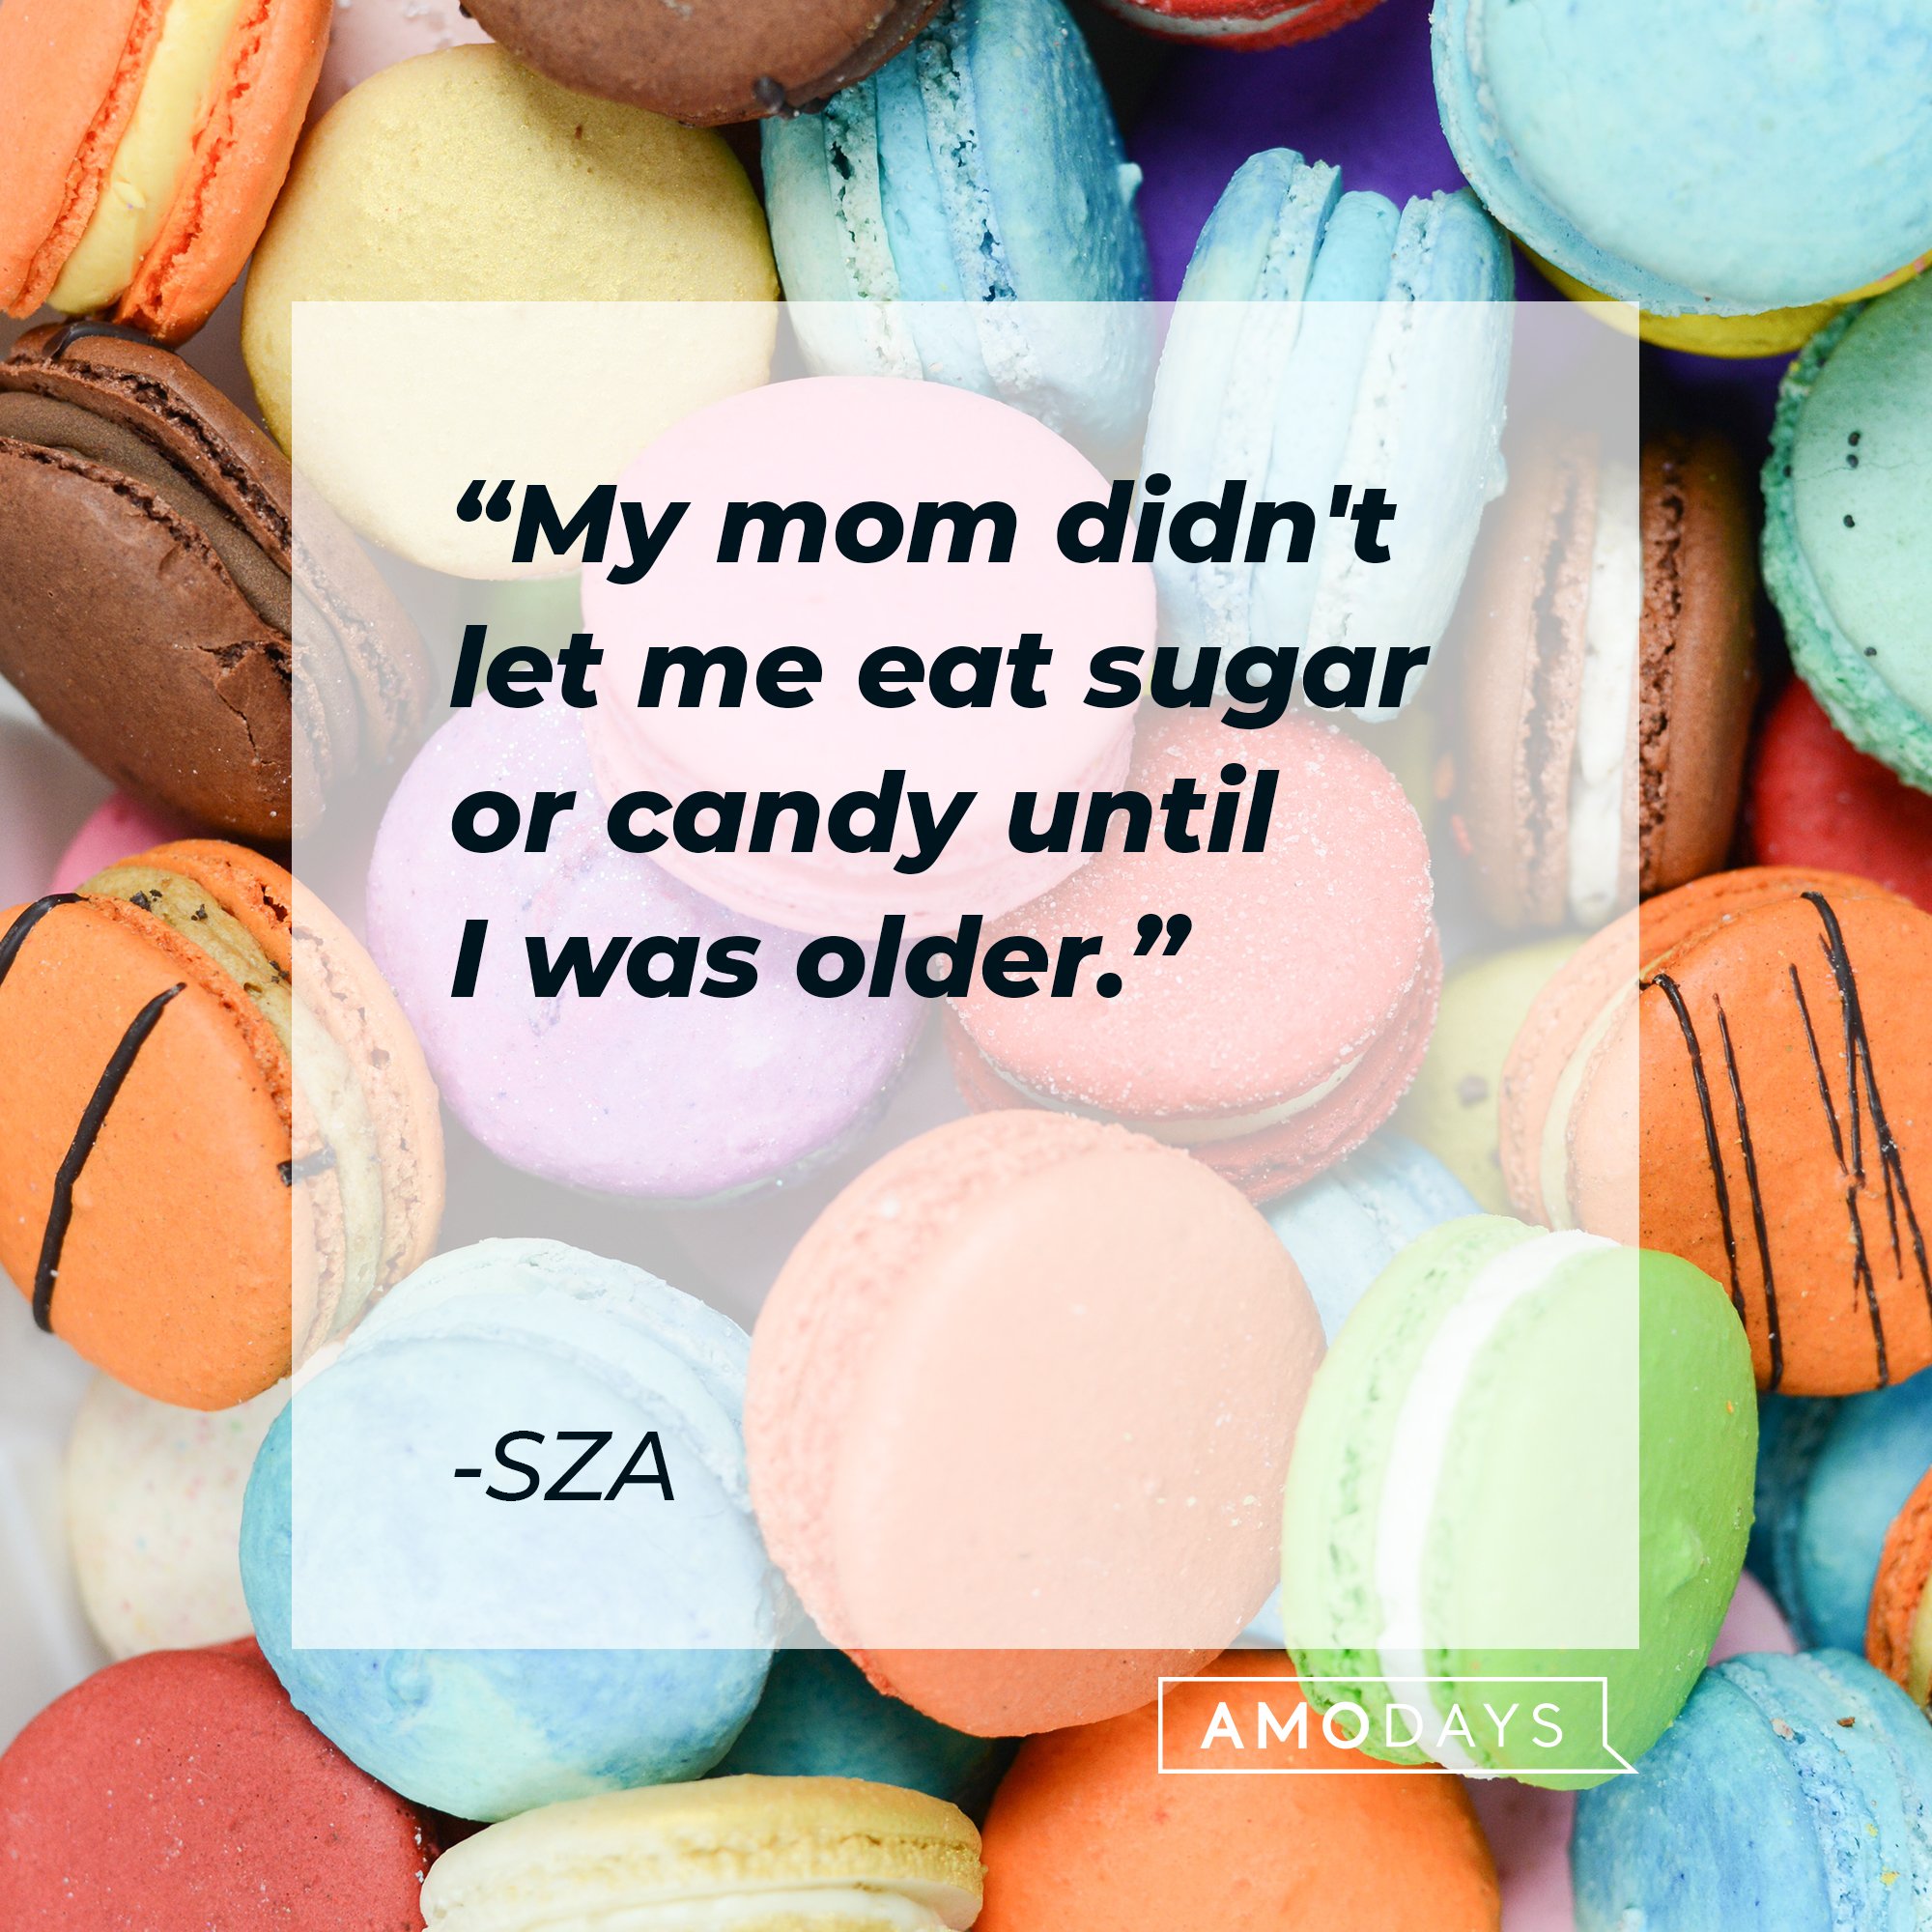 SZA’s quote: "My mom didn't let me eat sugar or candy until I was older.” | Image: AmoDays